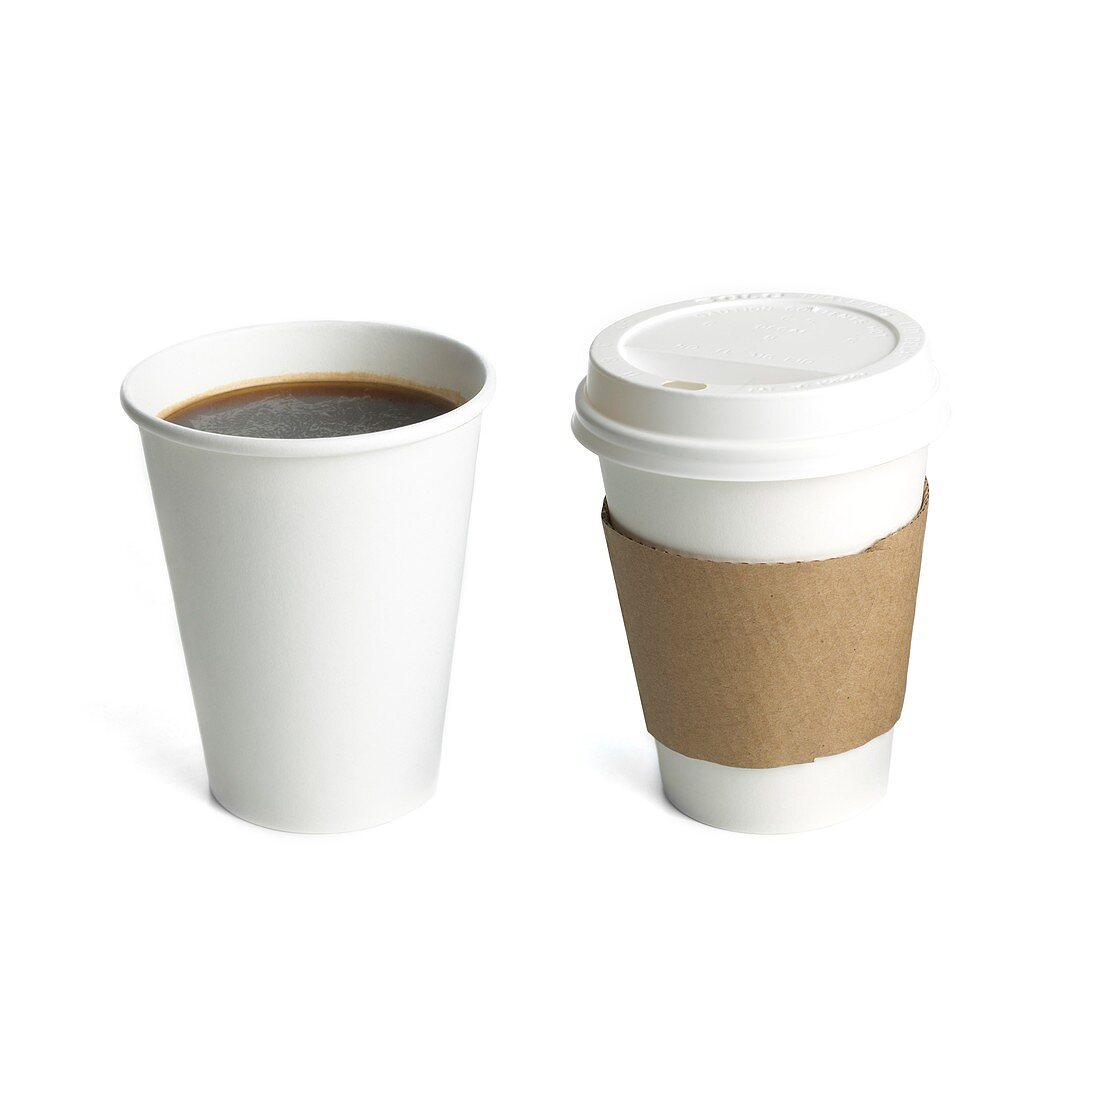 Coffee in polystyrene and paper cups